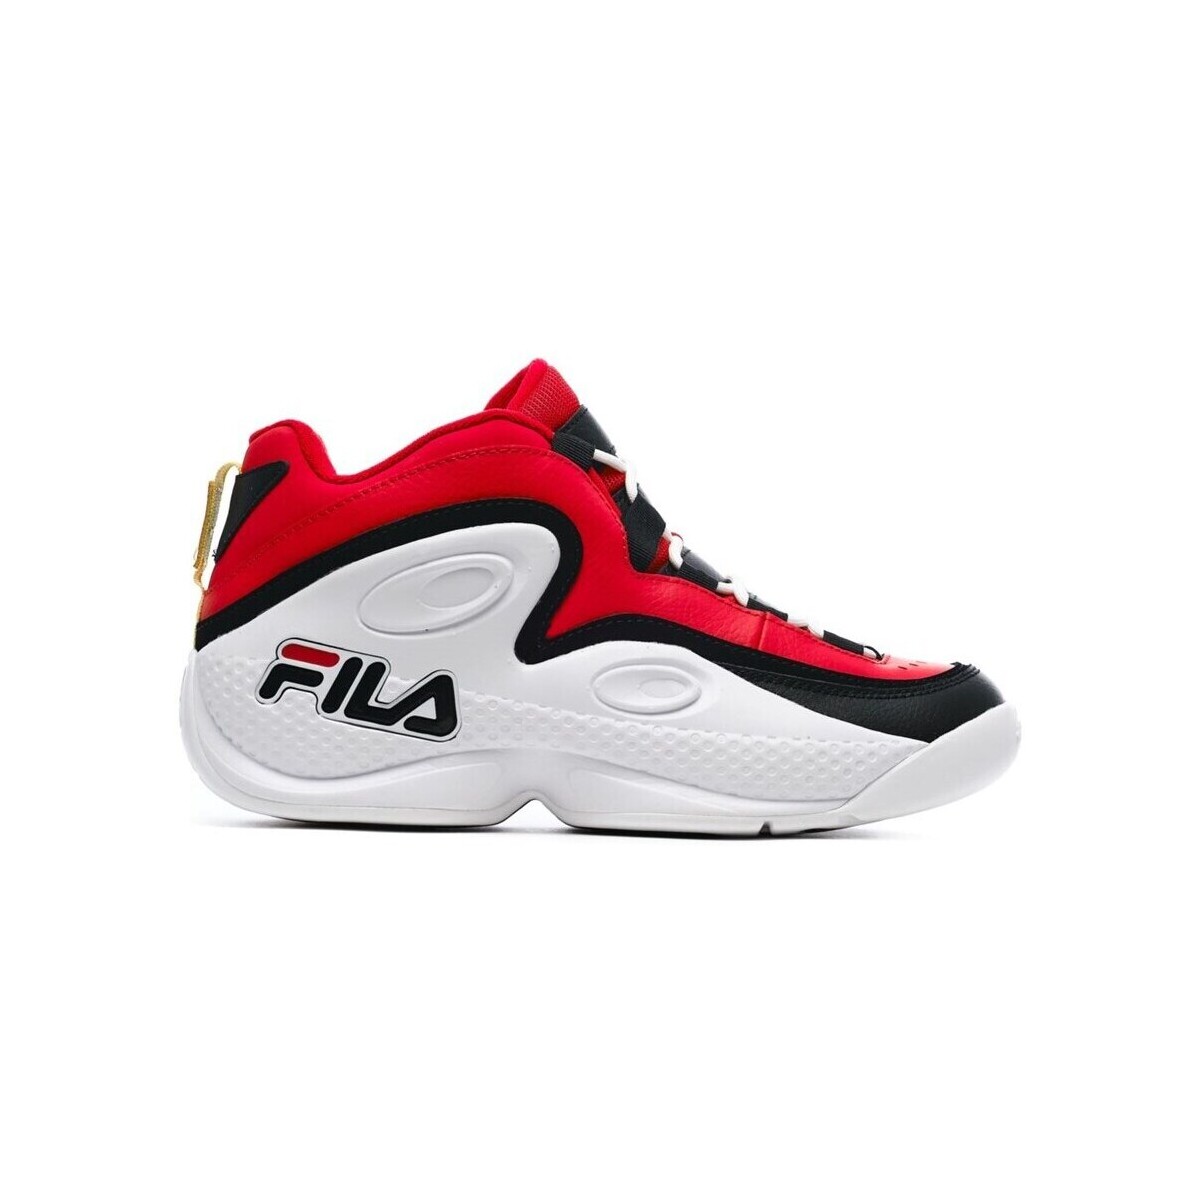 Chaussures Homme Boots Fila Grant Hill 3 Mid Blanc, Rouge